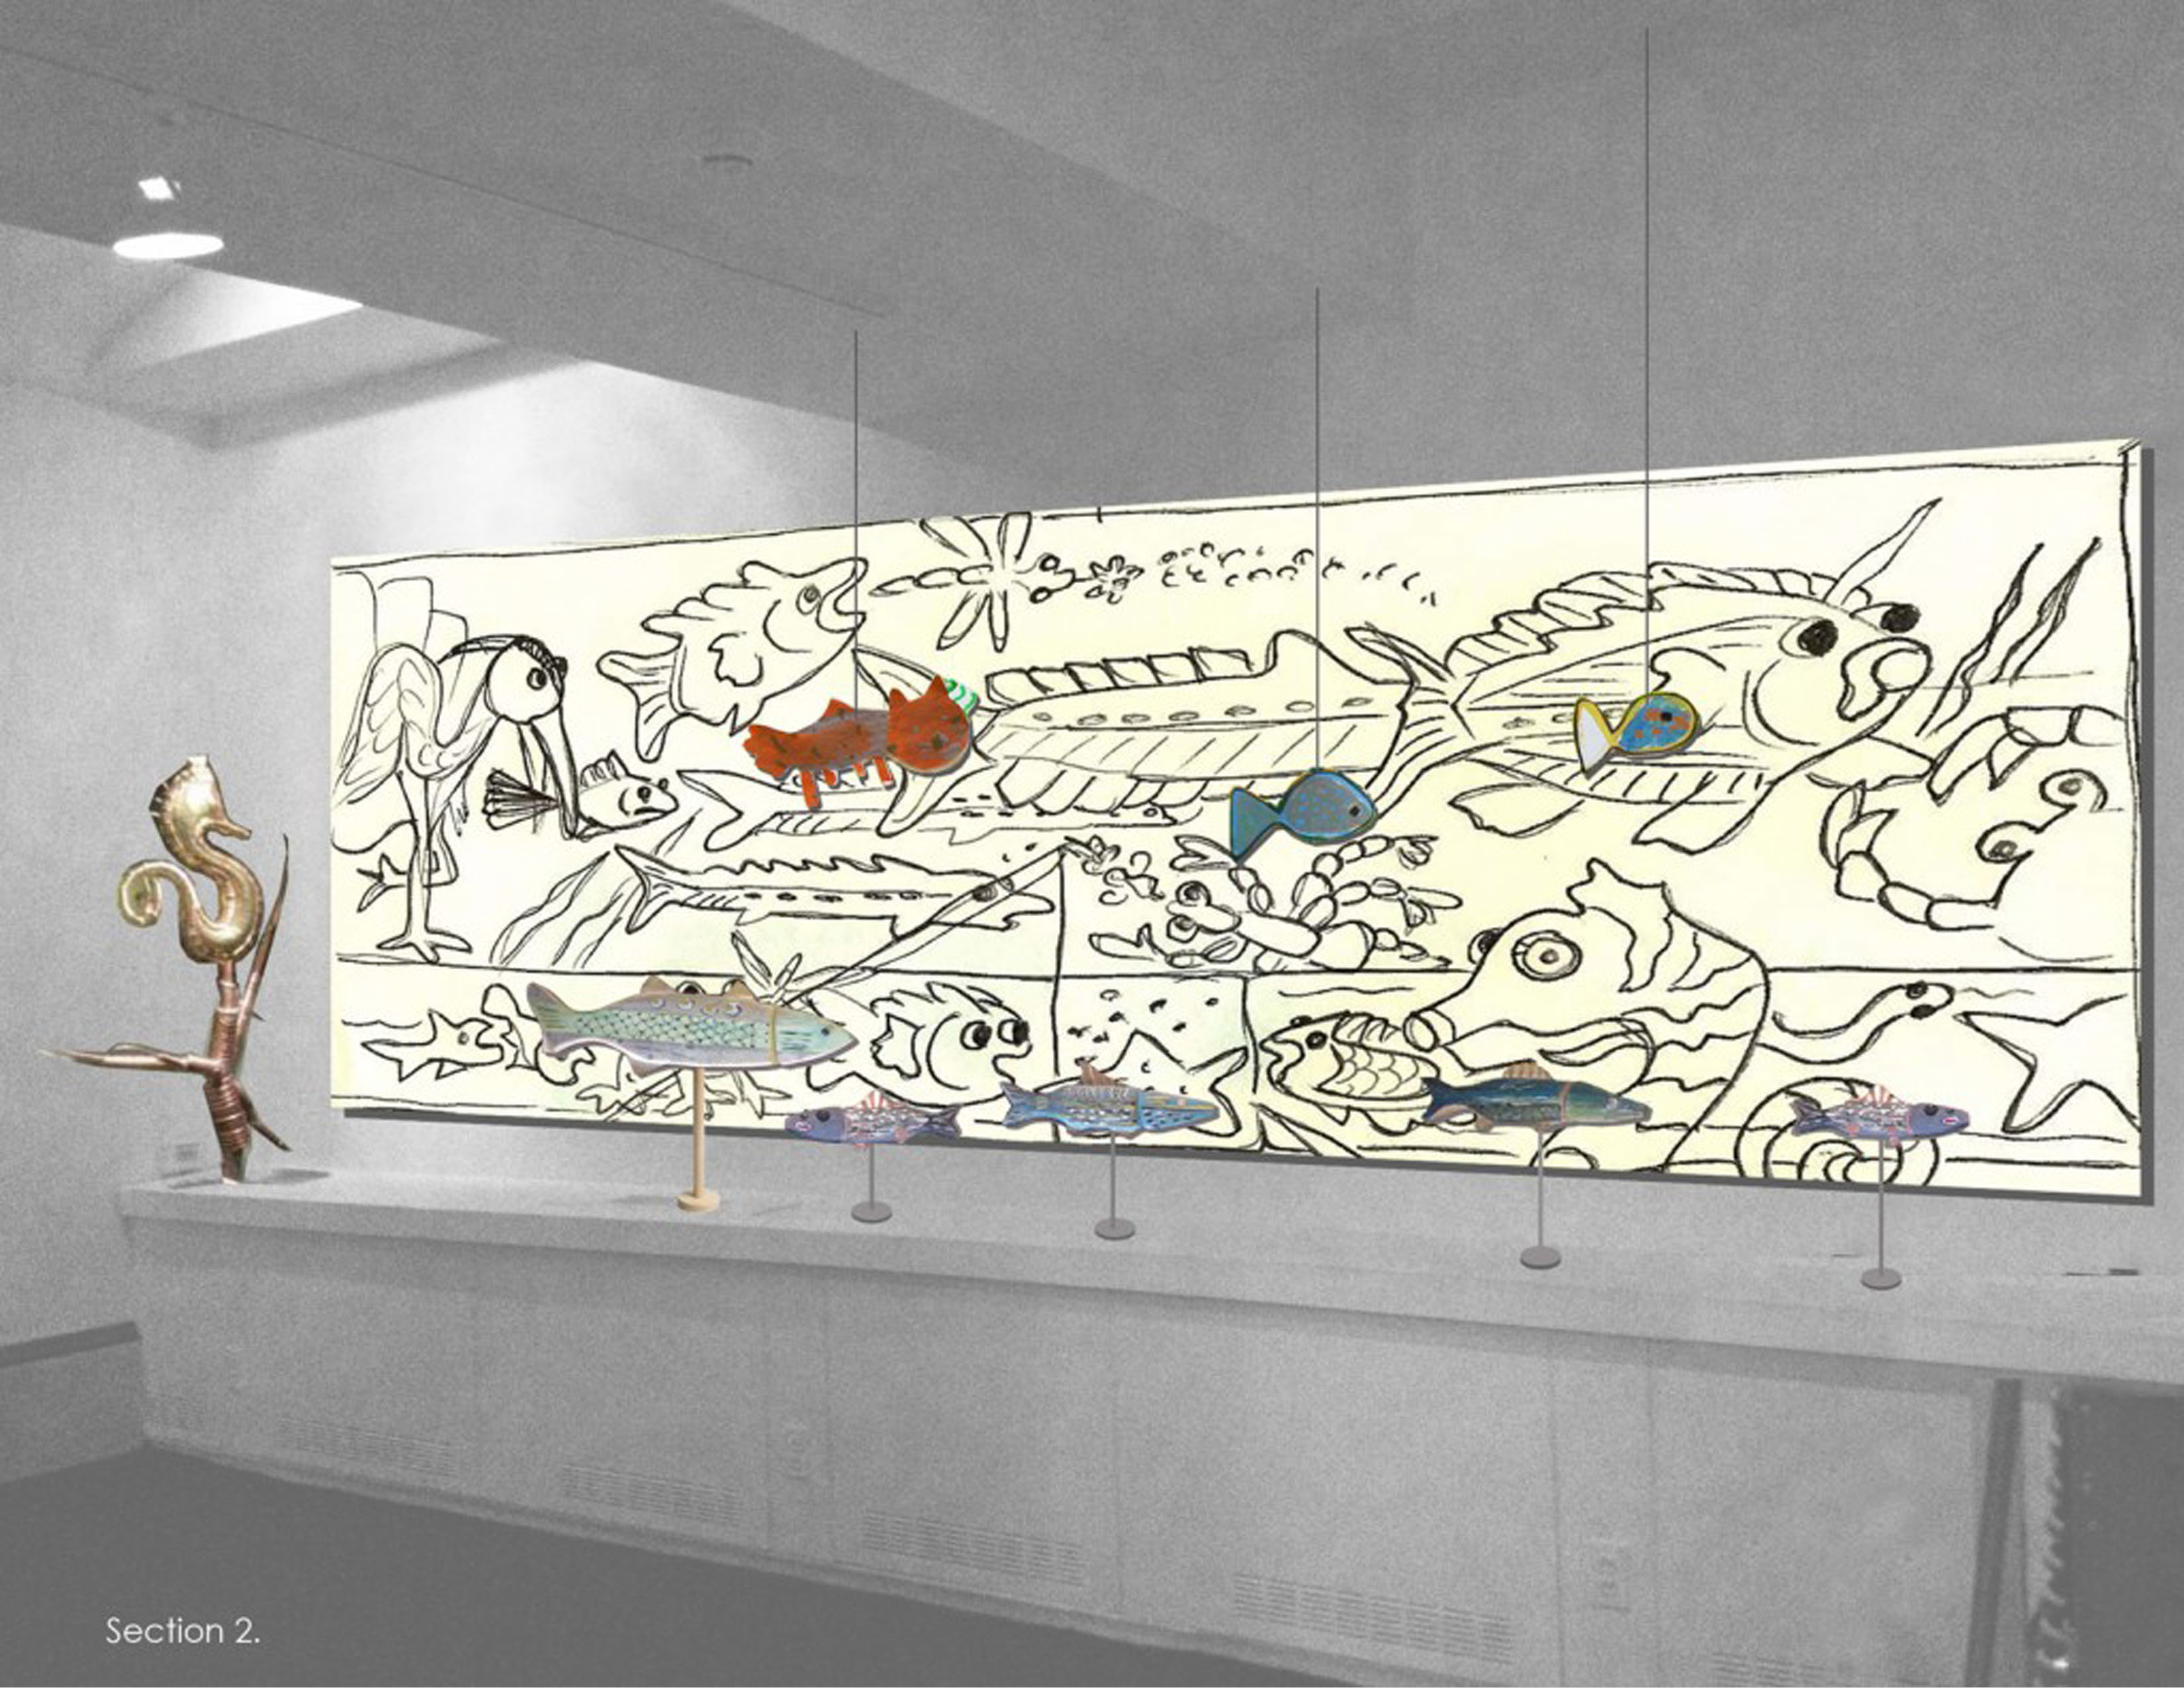 Fish Tales Exhibit at ArtsWestchester Gallery, New York (series of preliminary sketches)